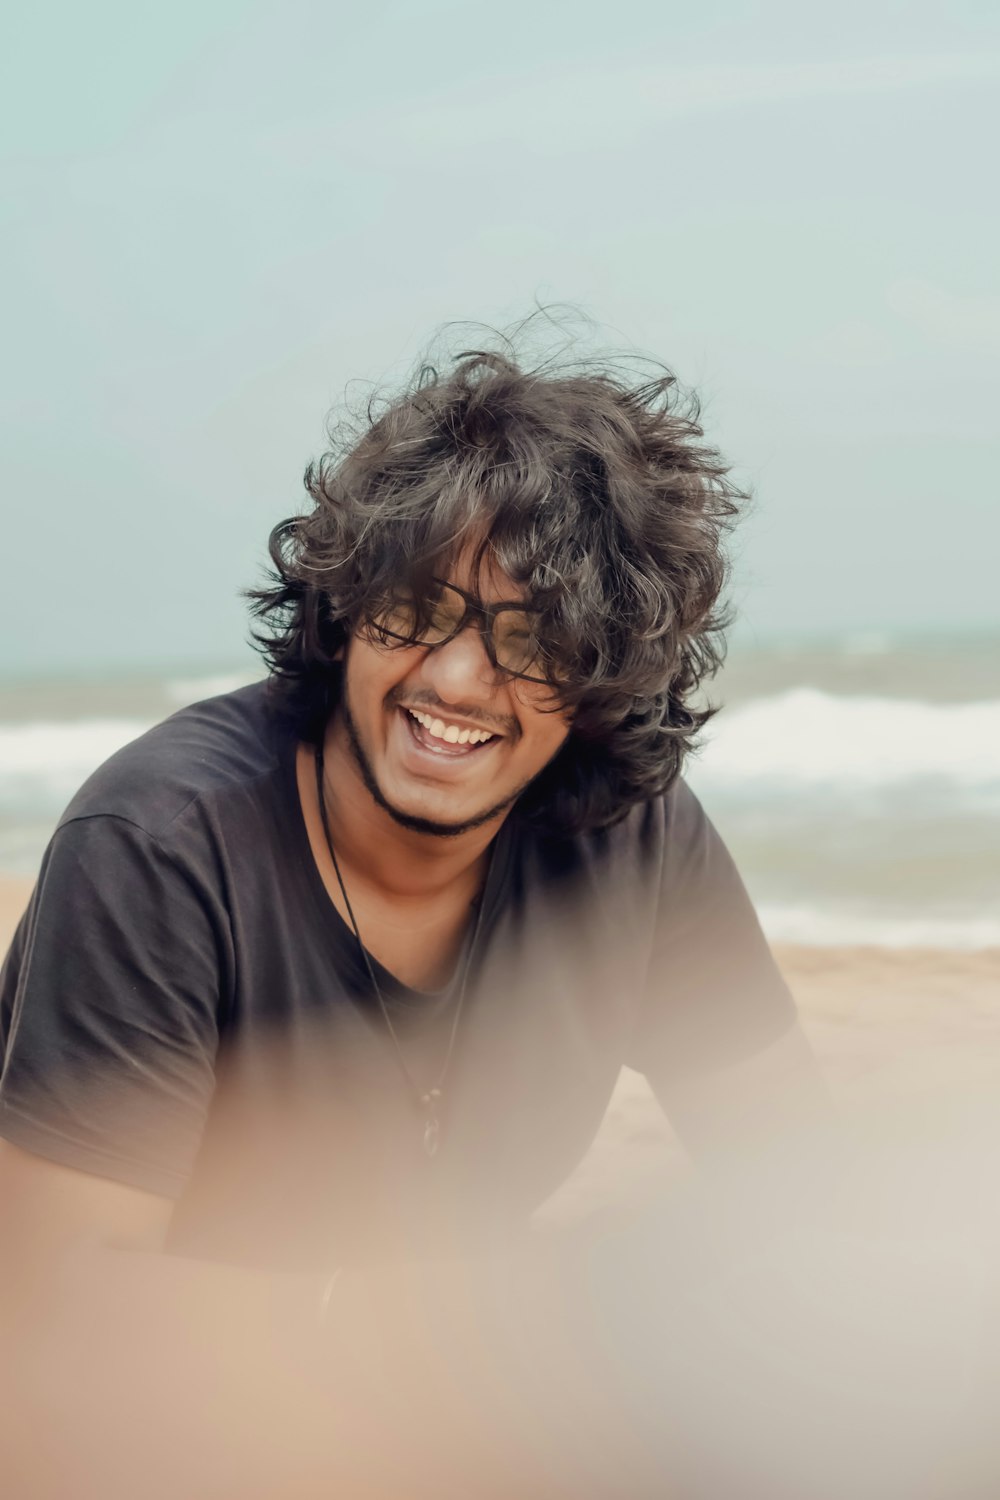 a man with curly hair and sunglasses on a beach